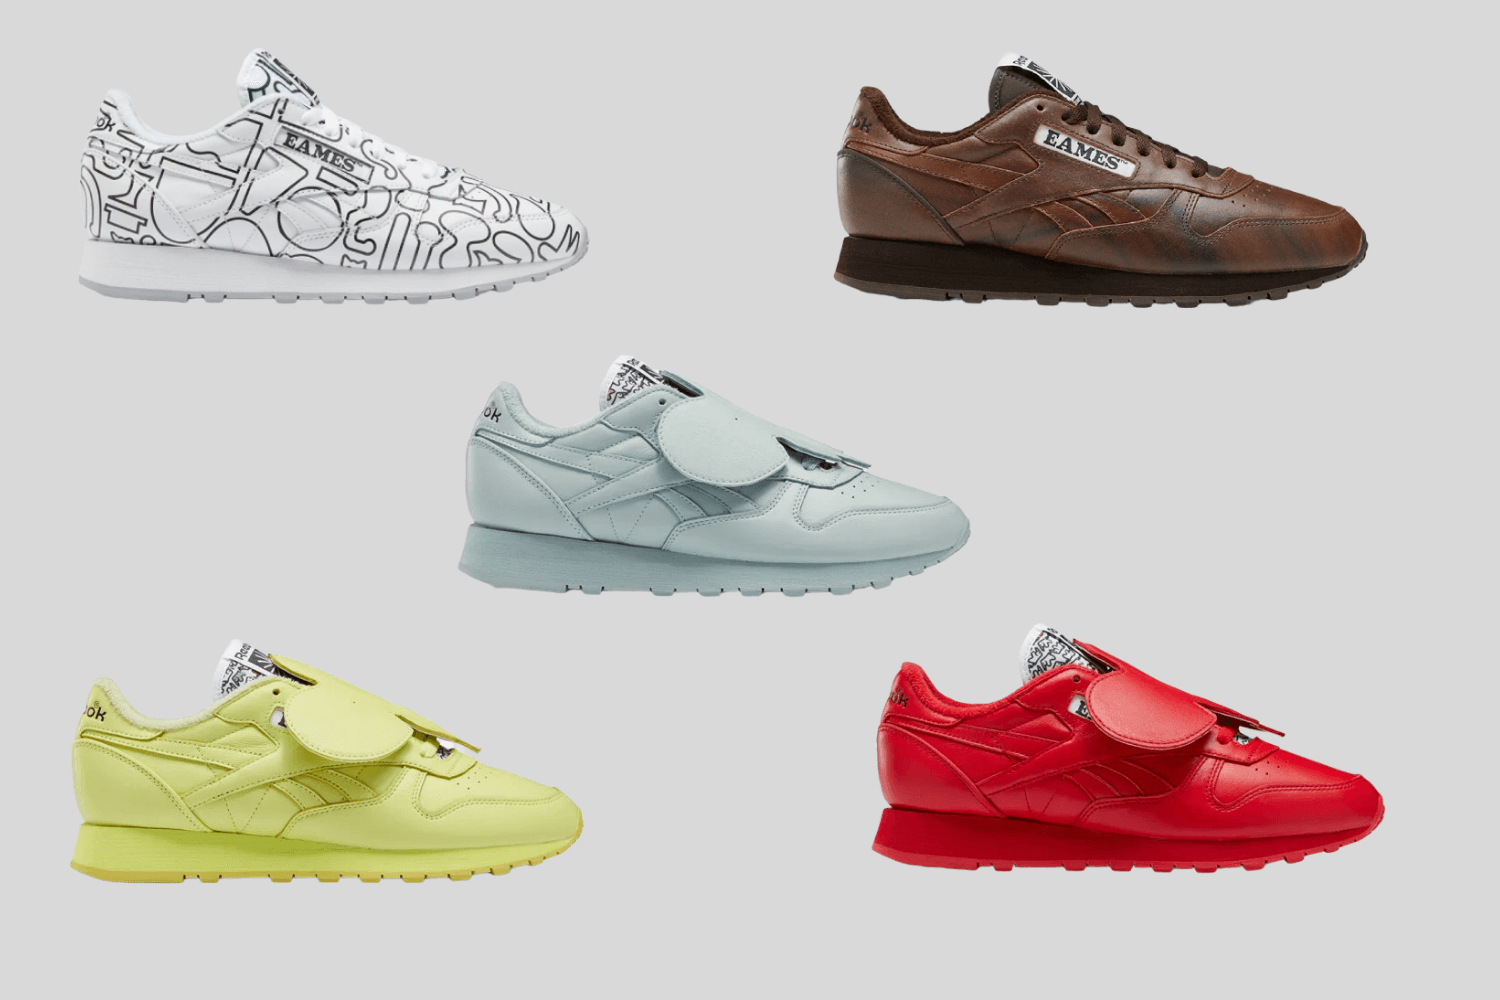 Eames x Reebok Classic Leather Collection